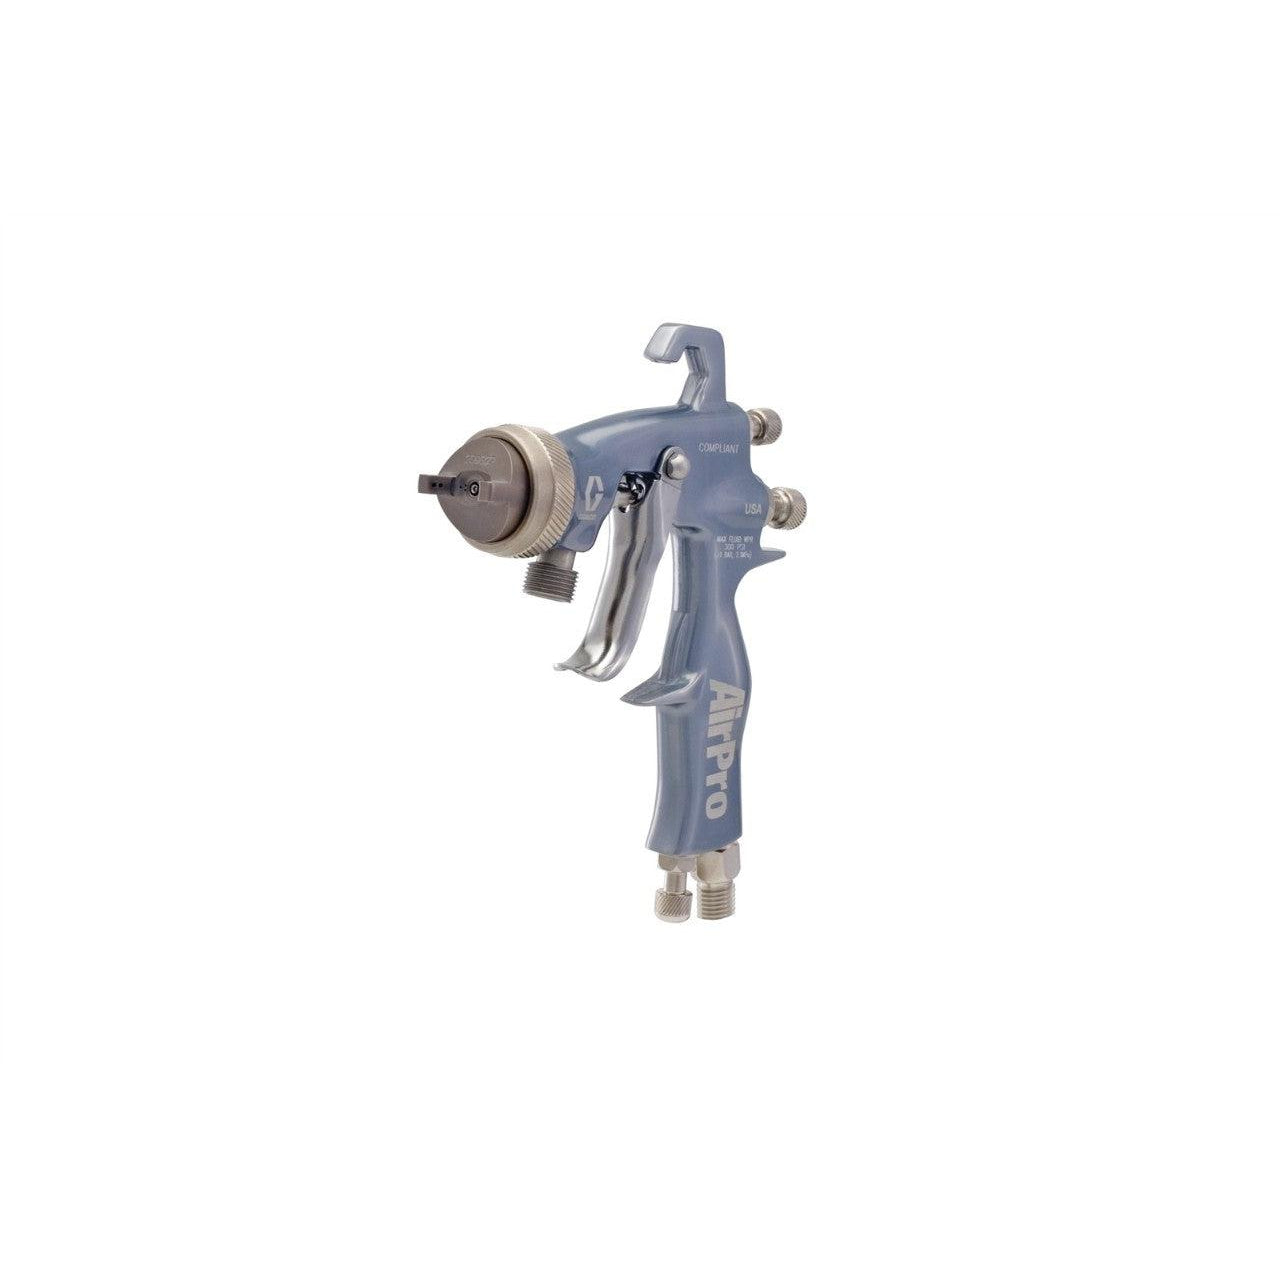 AirPro Air Spray Pressure Feed Gun, Compliant, 0.042 inch (1.1 mm) Nozzle, for Waterborne Applications